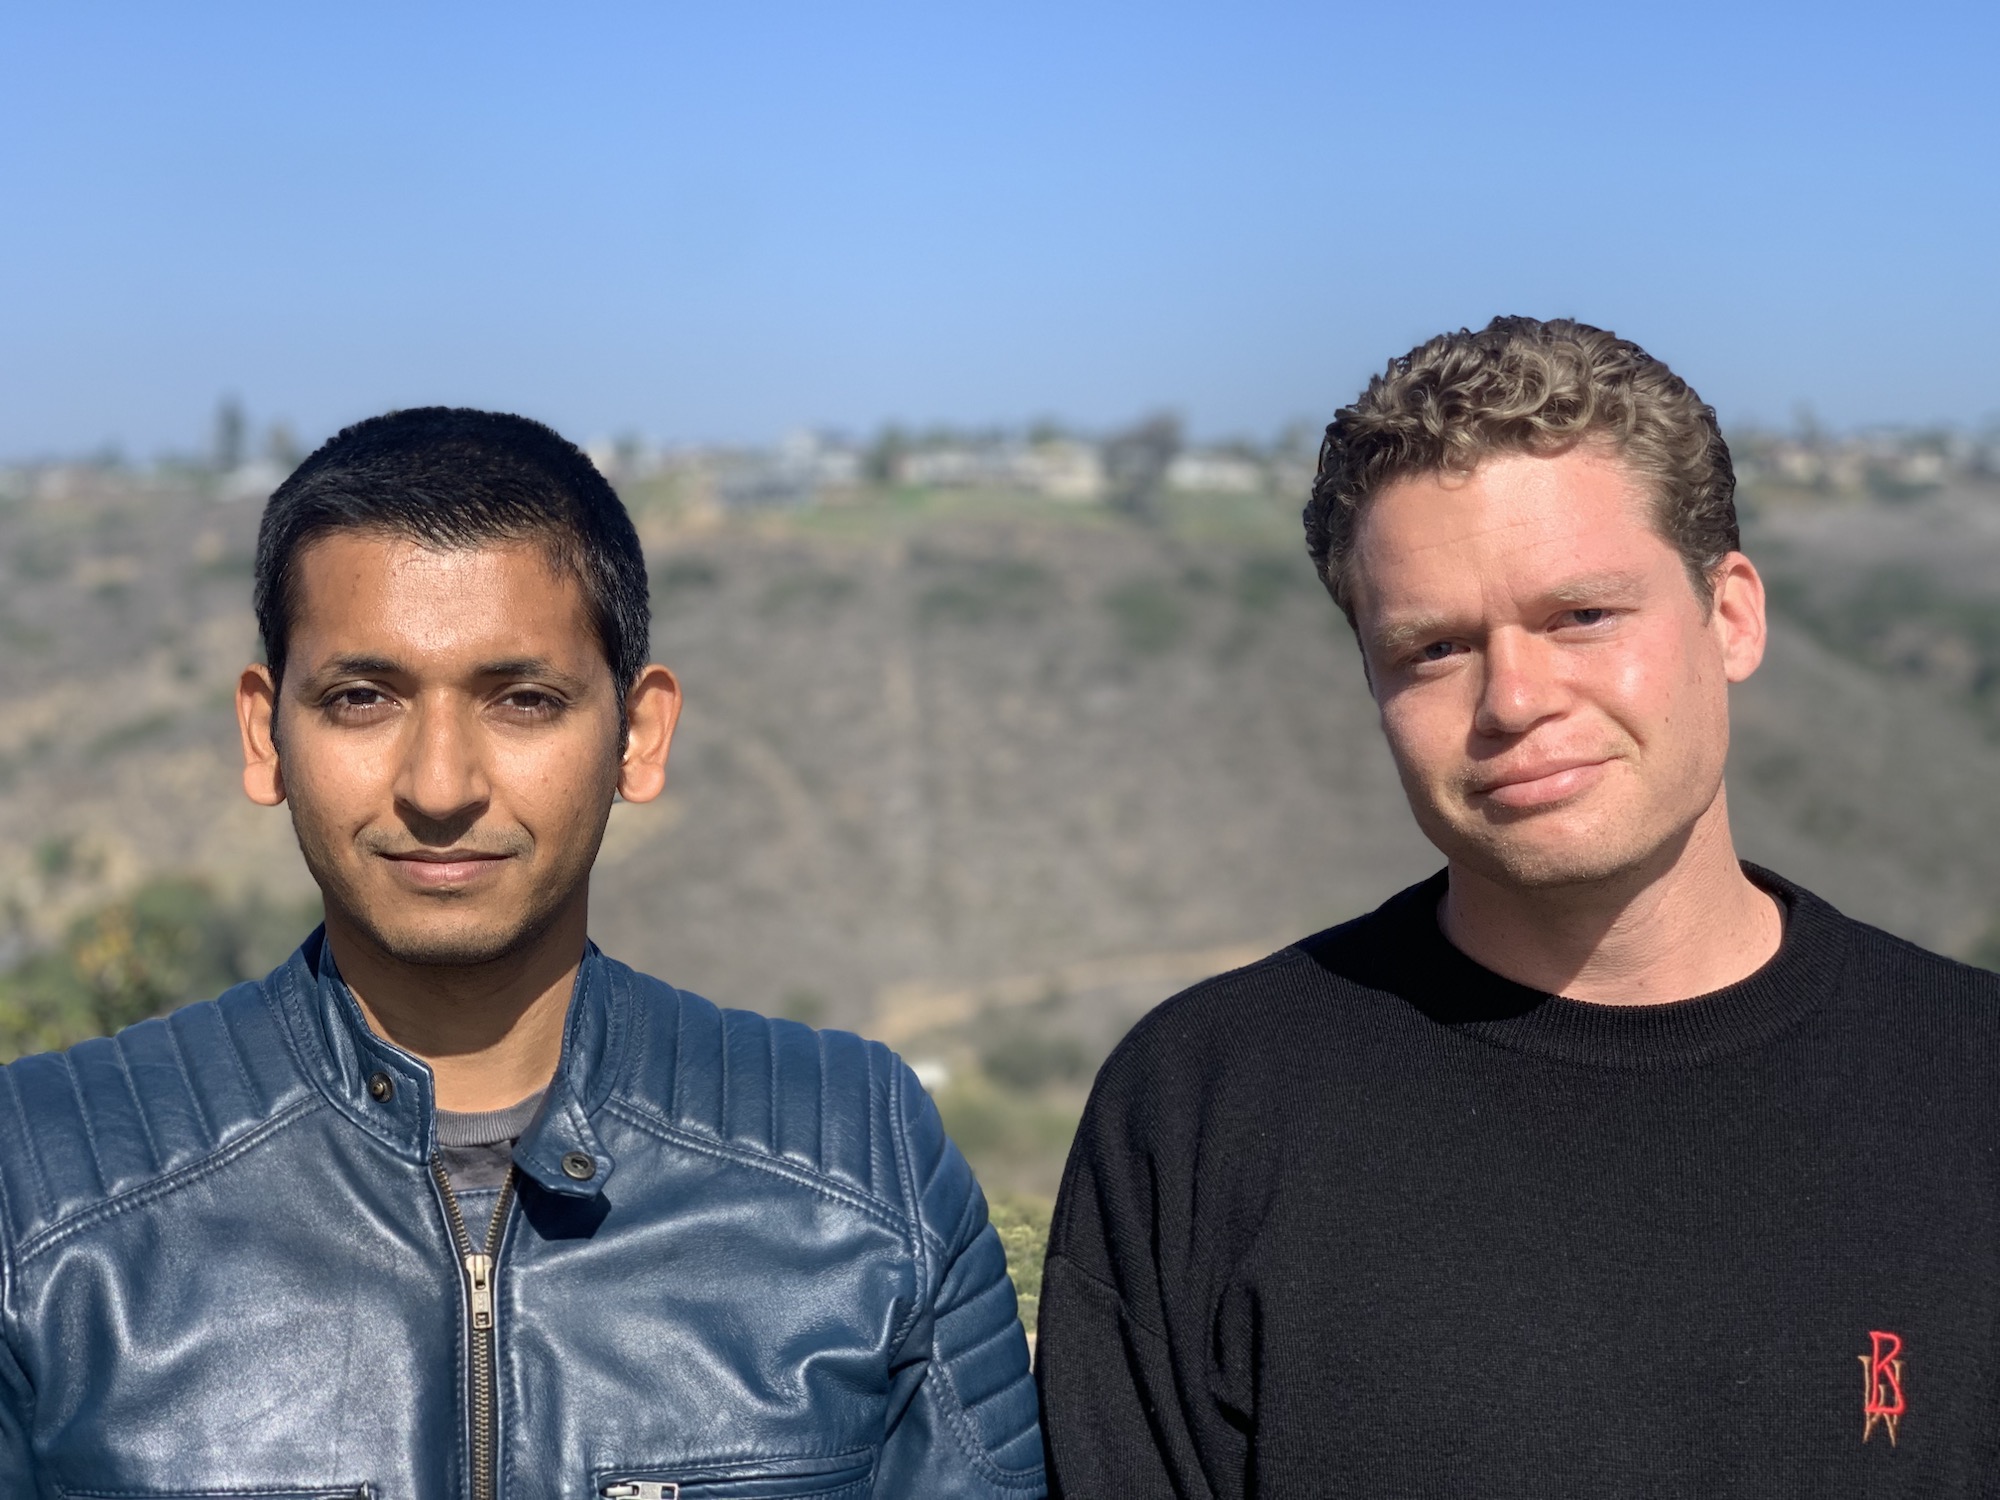 Abhi Sharma and Mark Murphy stand together with a blurry hillside in the background